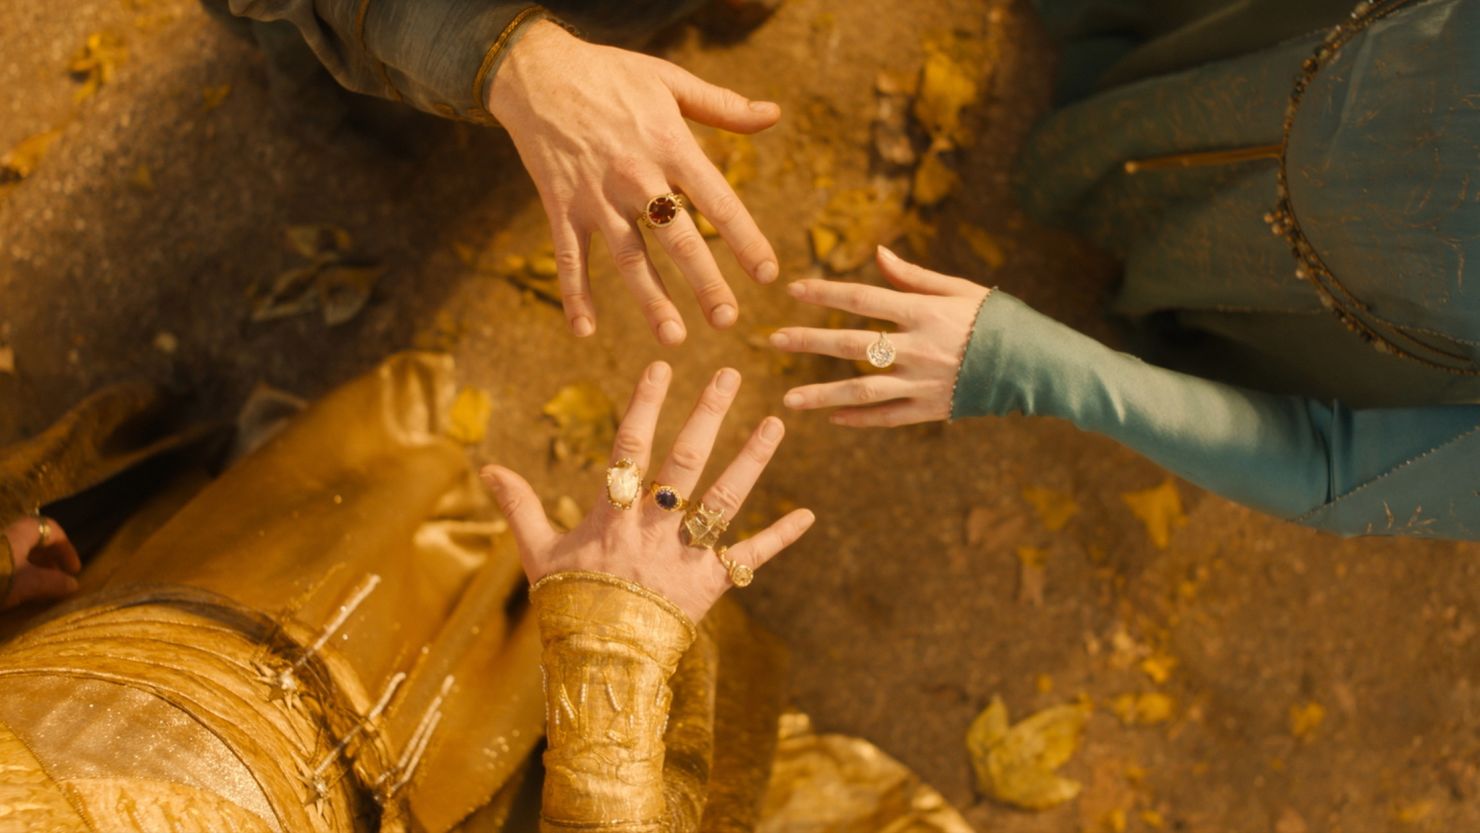 A scene from the new trailer for Season 2 of Prime Video's 'Lord of the Rings: The Rings of Power,' set to debut in August.